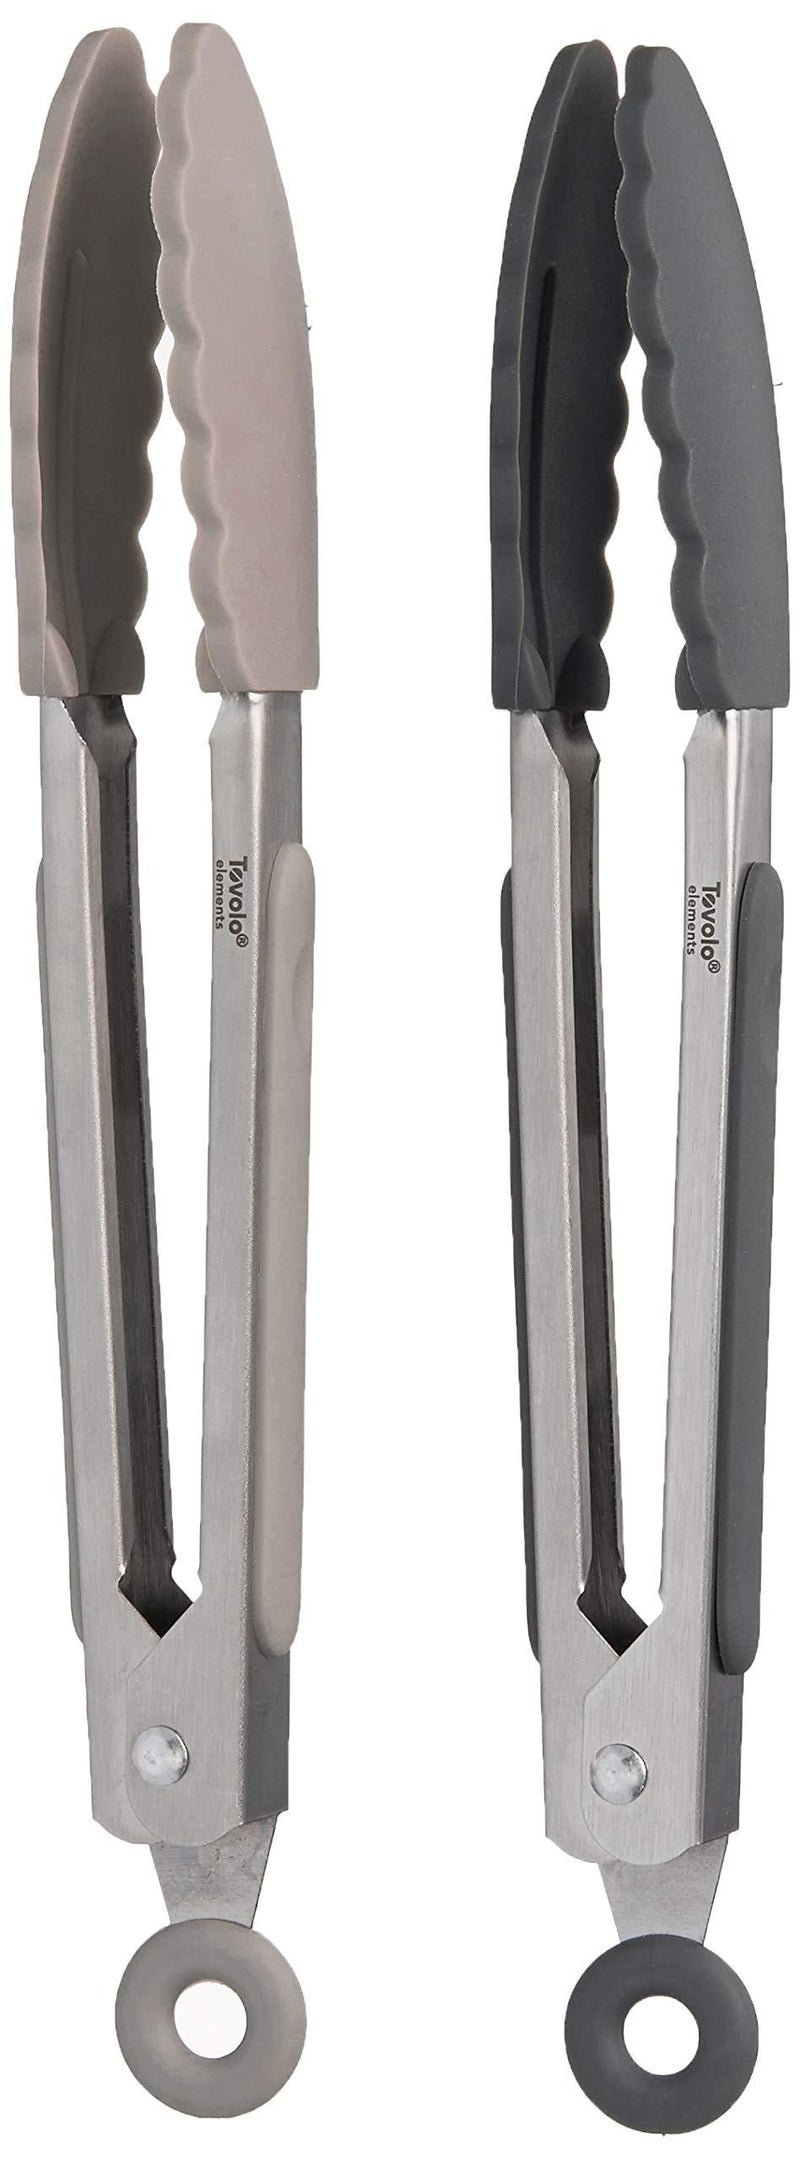 NewNest Australia - Tovolo Kitchen Cooking Mini Stainless Steel Tongs 7" with Silicone Grip & Easy Lock Mechanism for Serving, Salad, and Ice, Set of 2, Charcoal & Warm Gray 